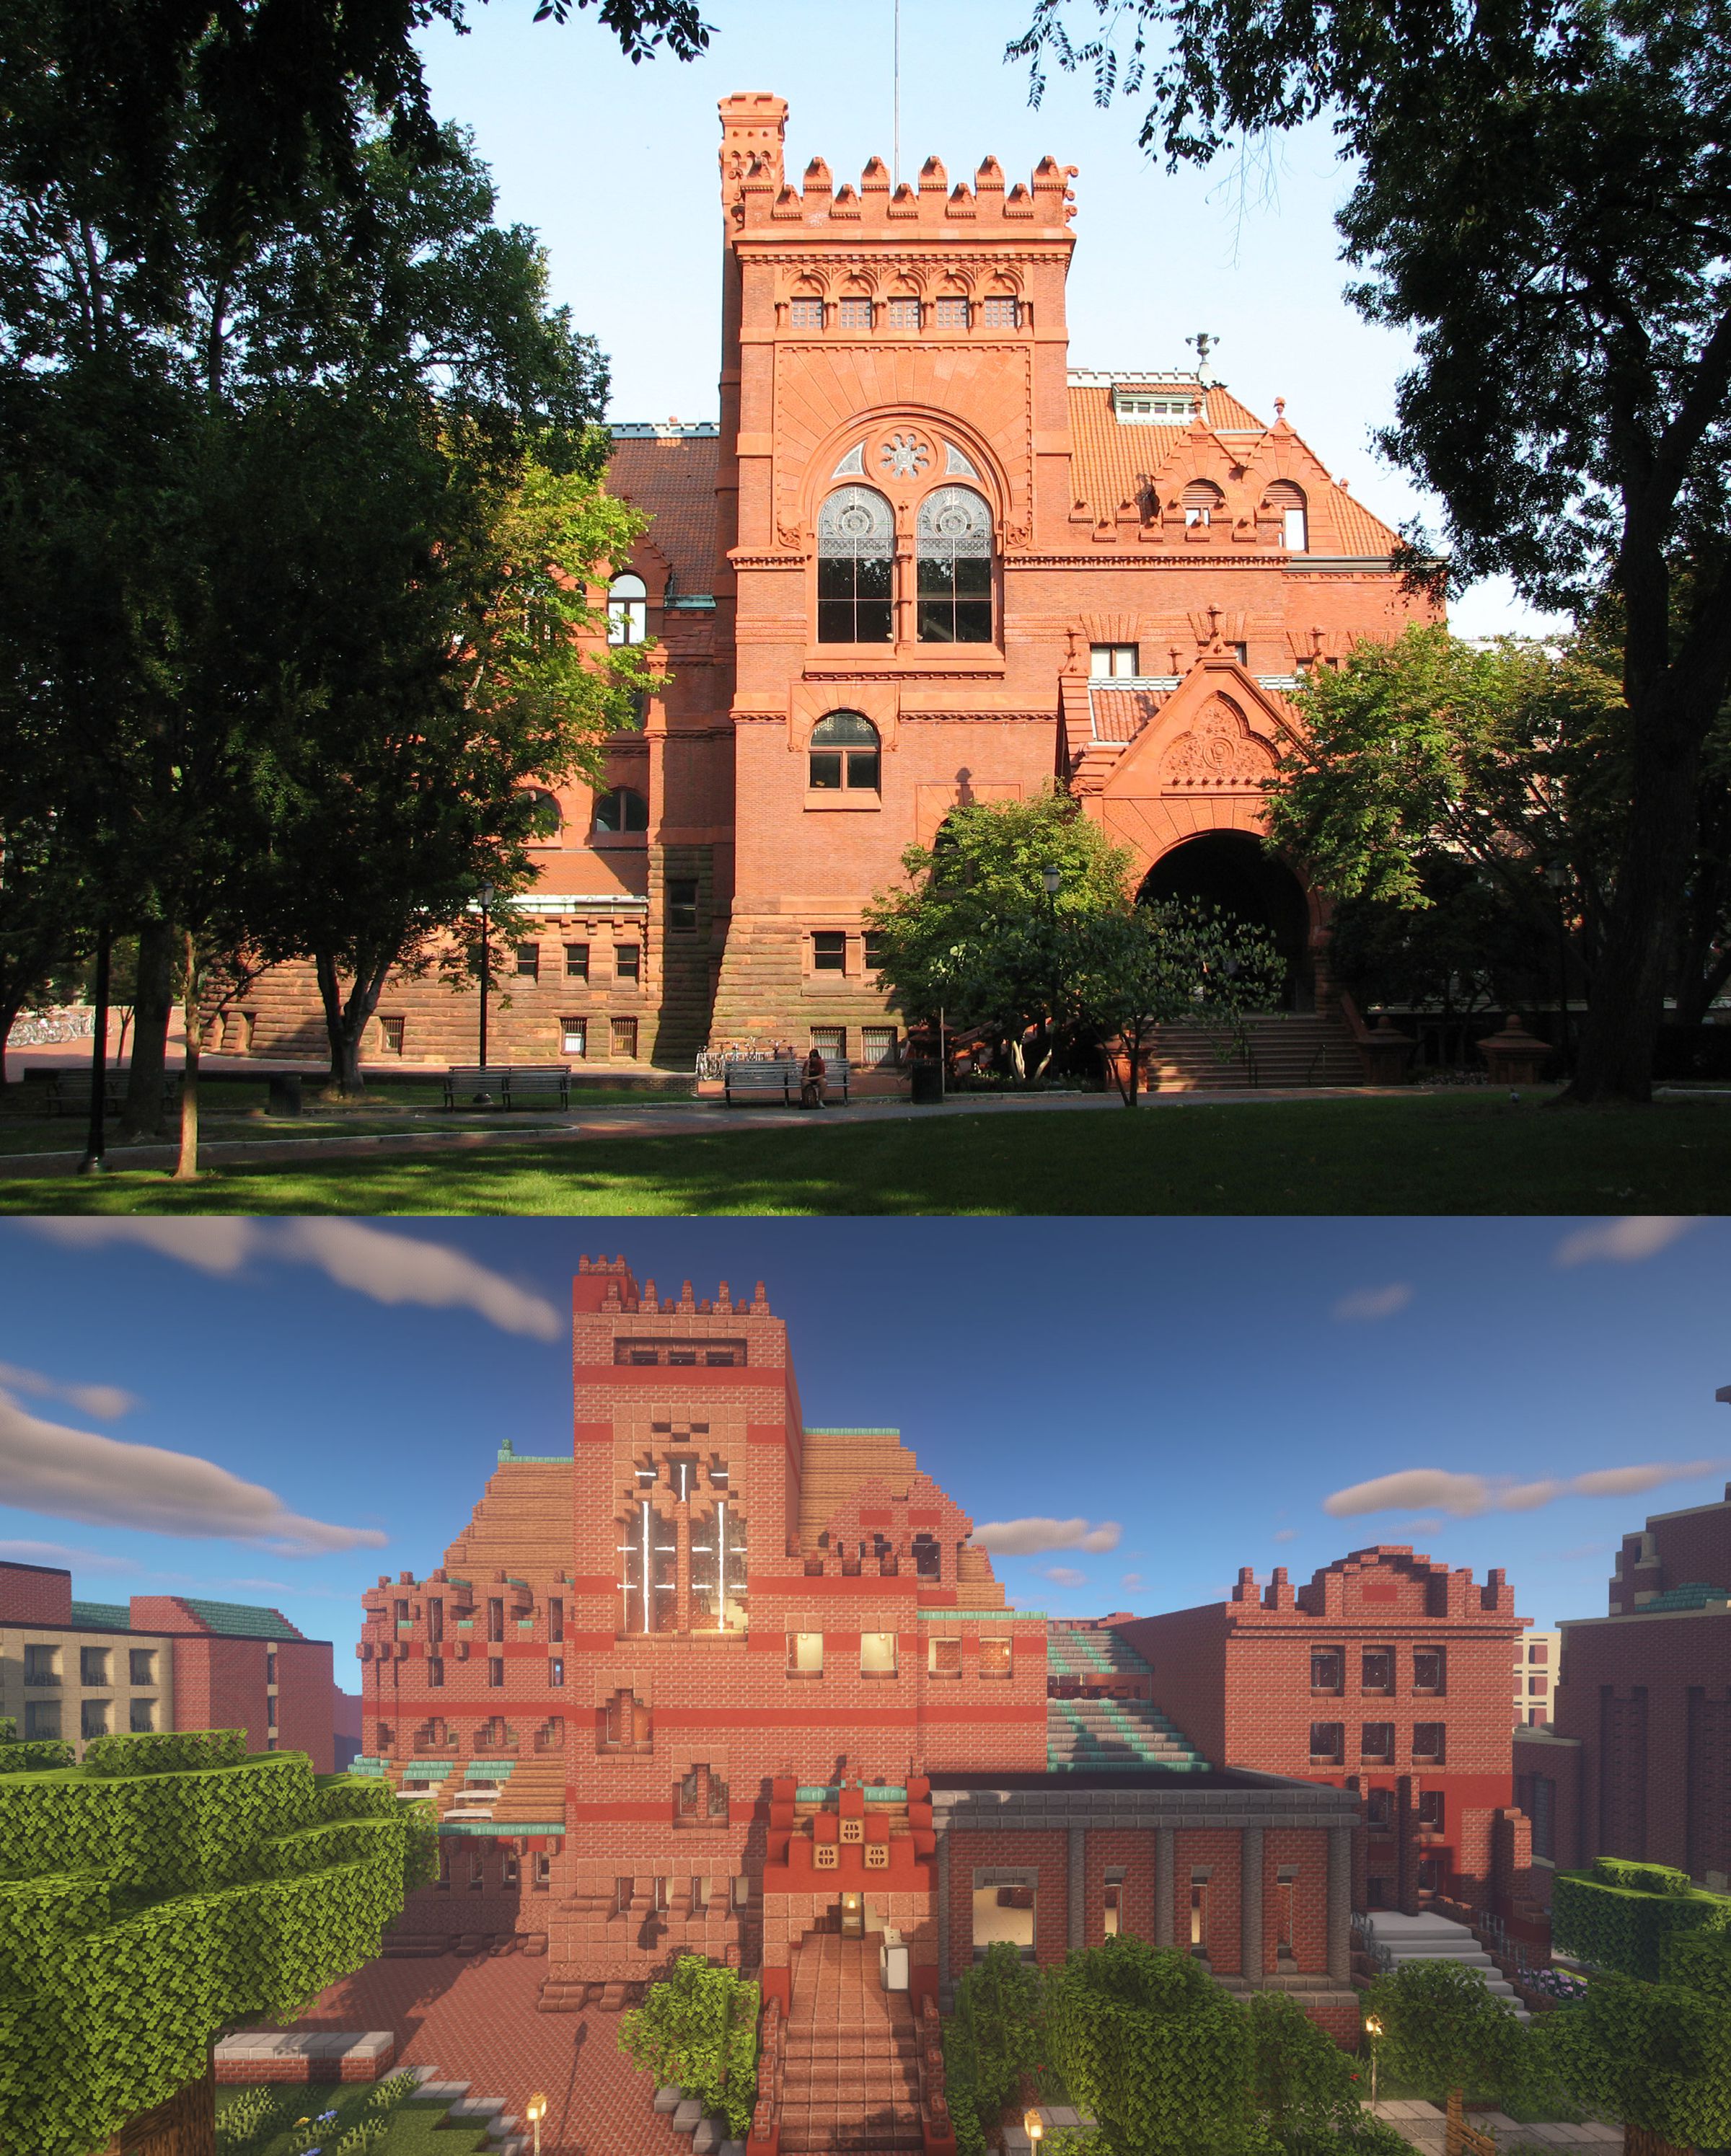 The Fisher Fine Arts Library at the University of Pennsylvania.